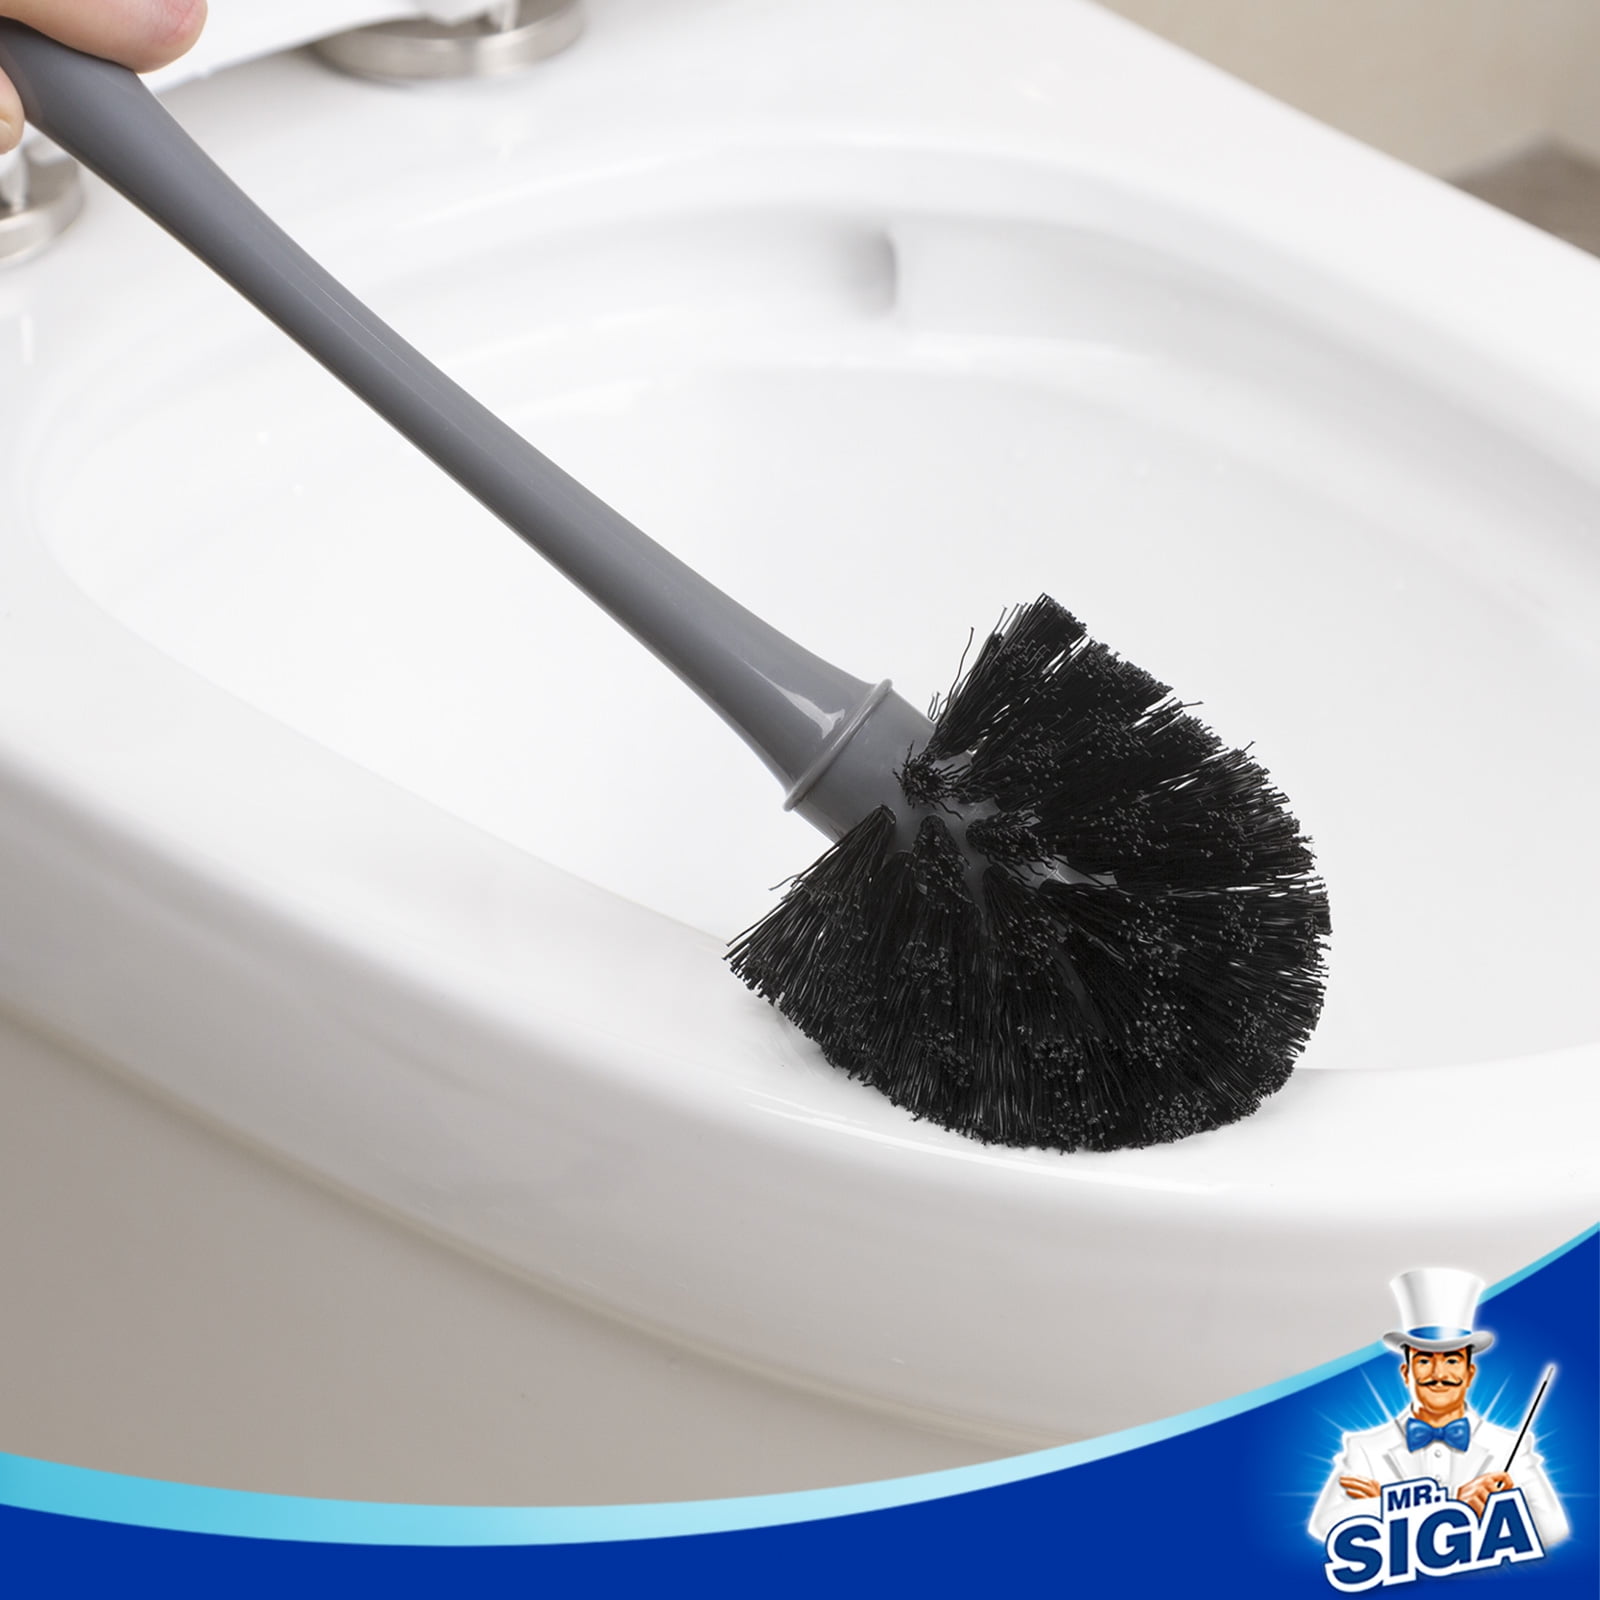 MR.SIGA Toilet Plunger and Bowl Brush Combo for Bathroom Cleaning Black 1 Set